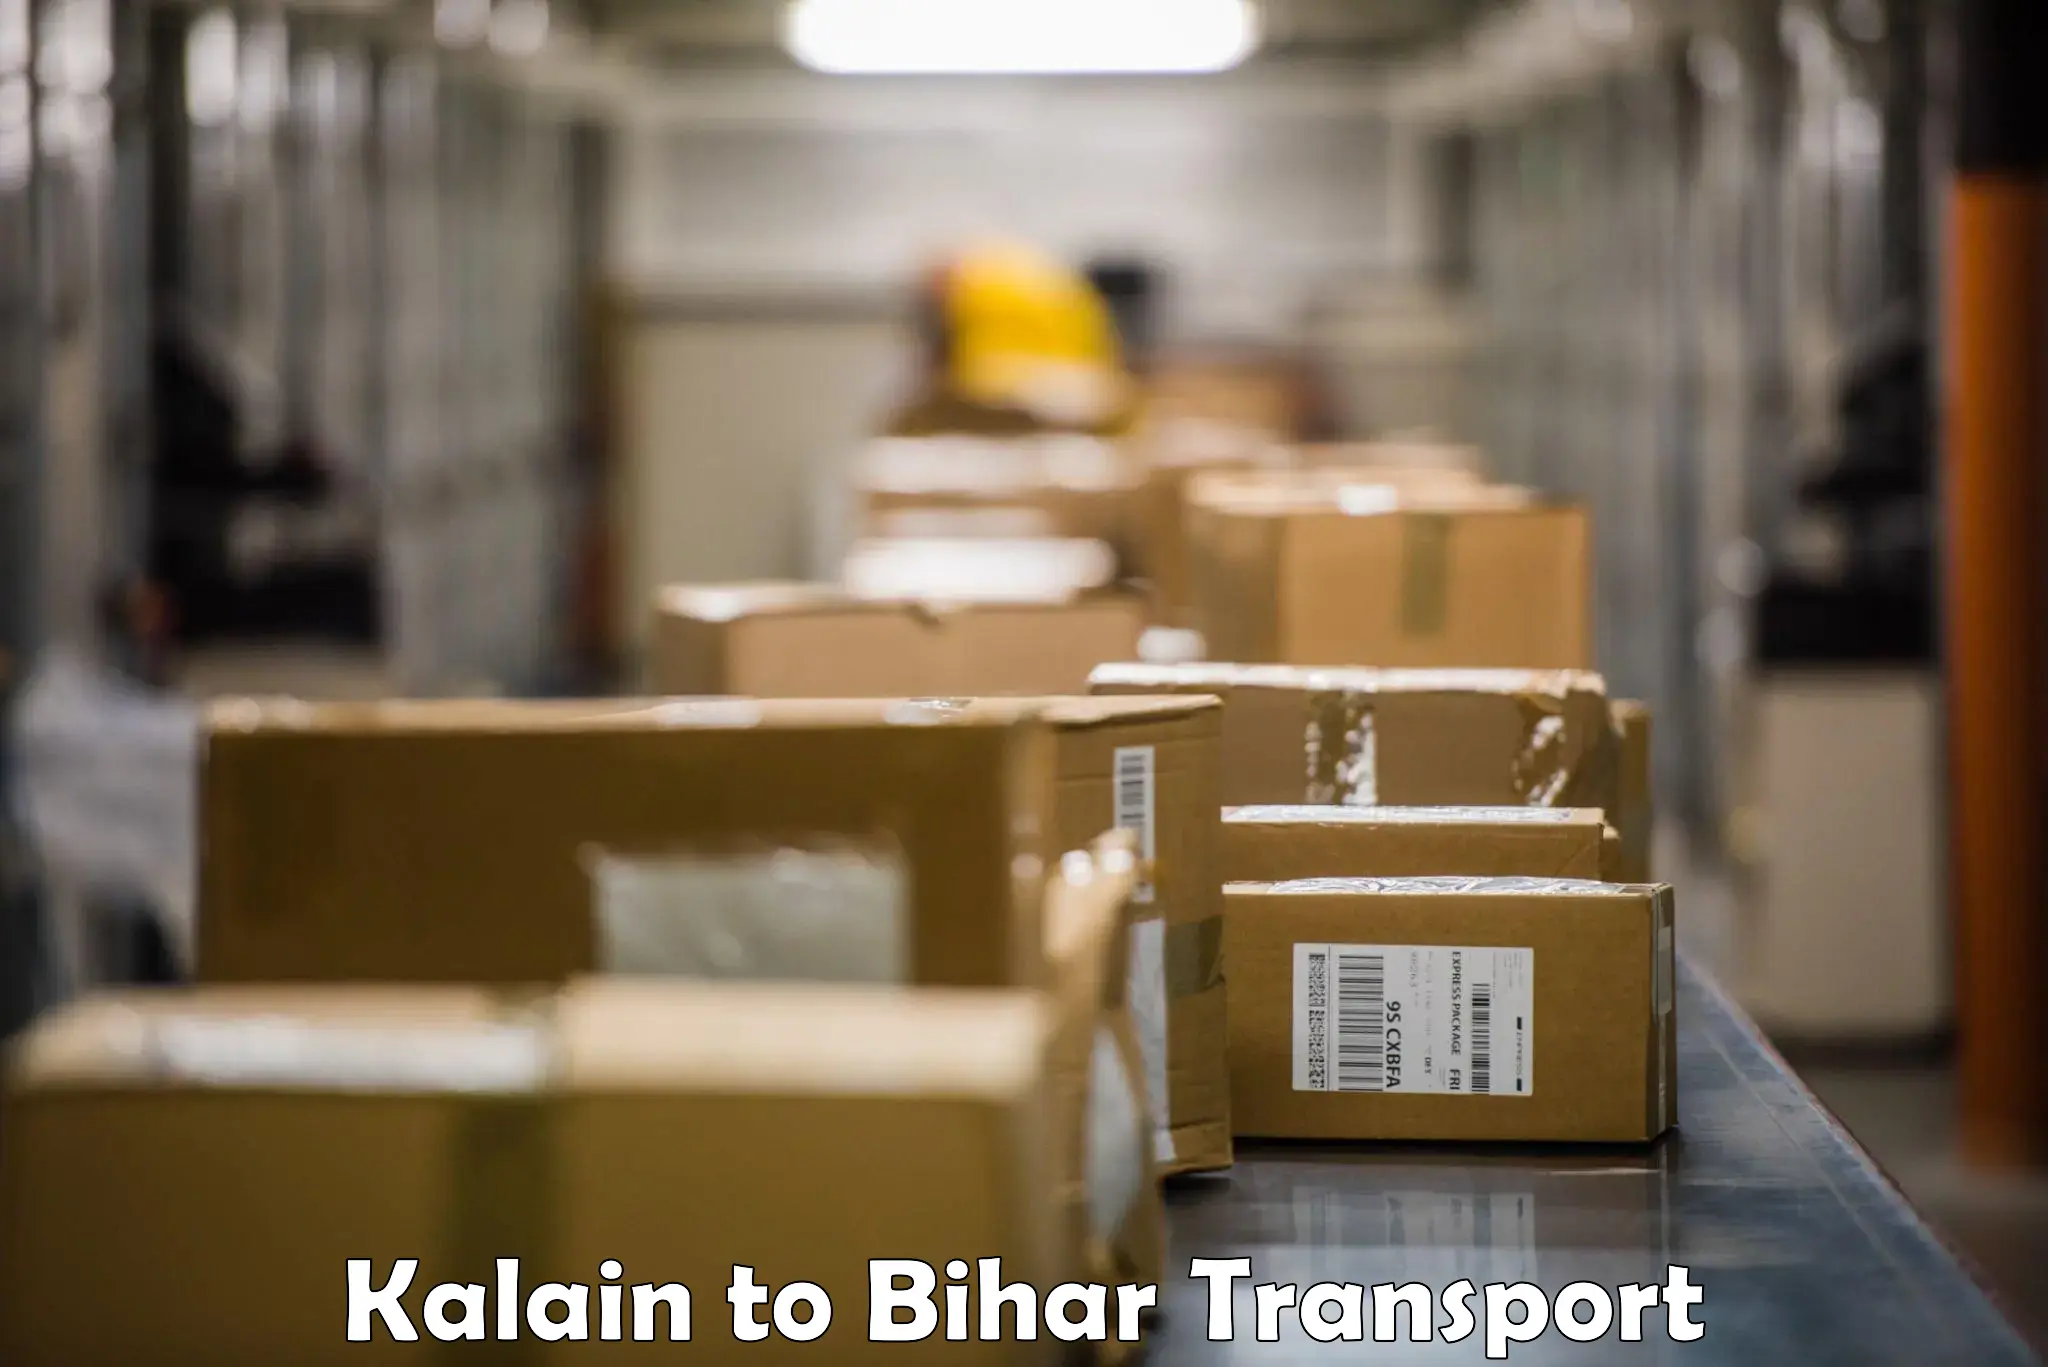 Transport bike from one state to another Kalain to Bihar